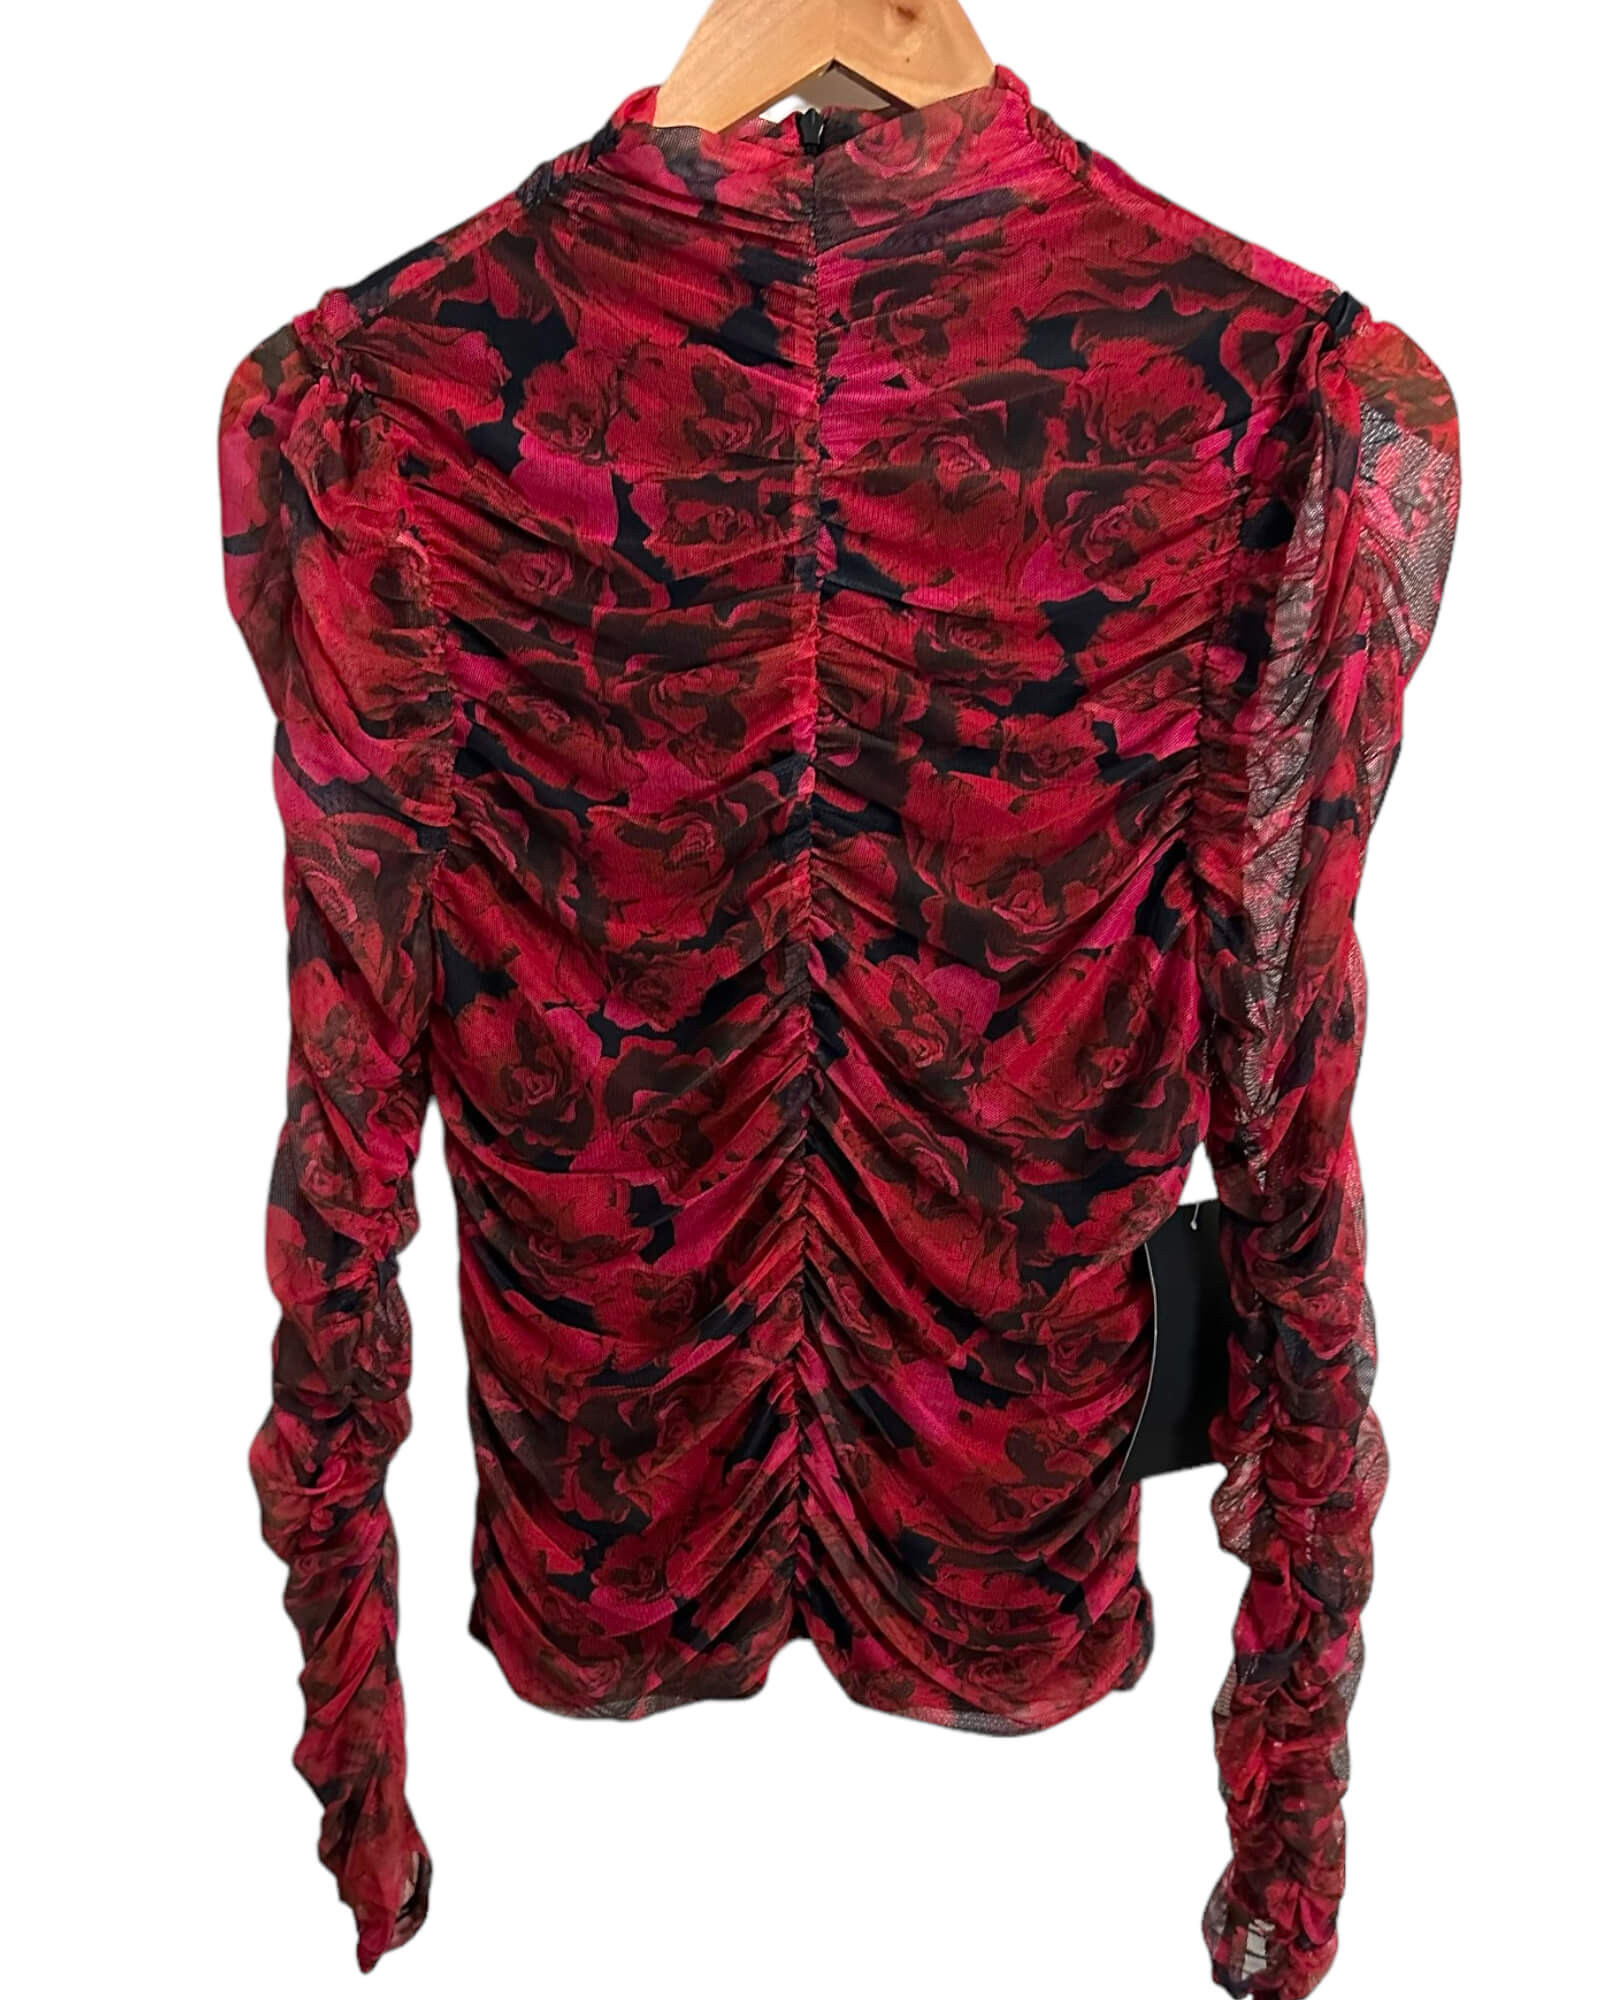 Dark Winter BAGATELLE COLLECTION rose print ruched mesh blouse